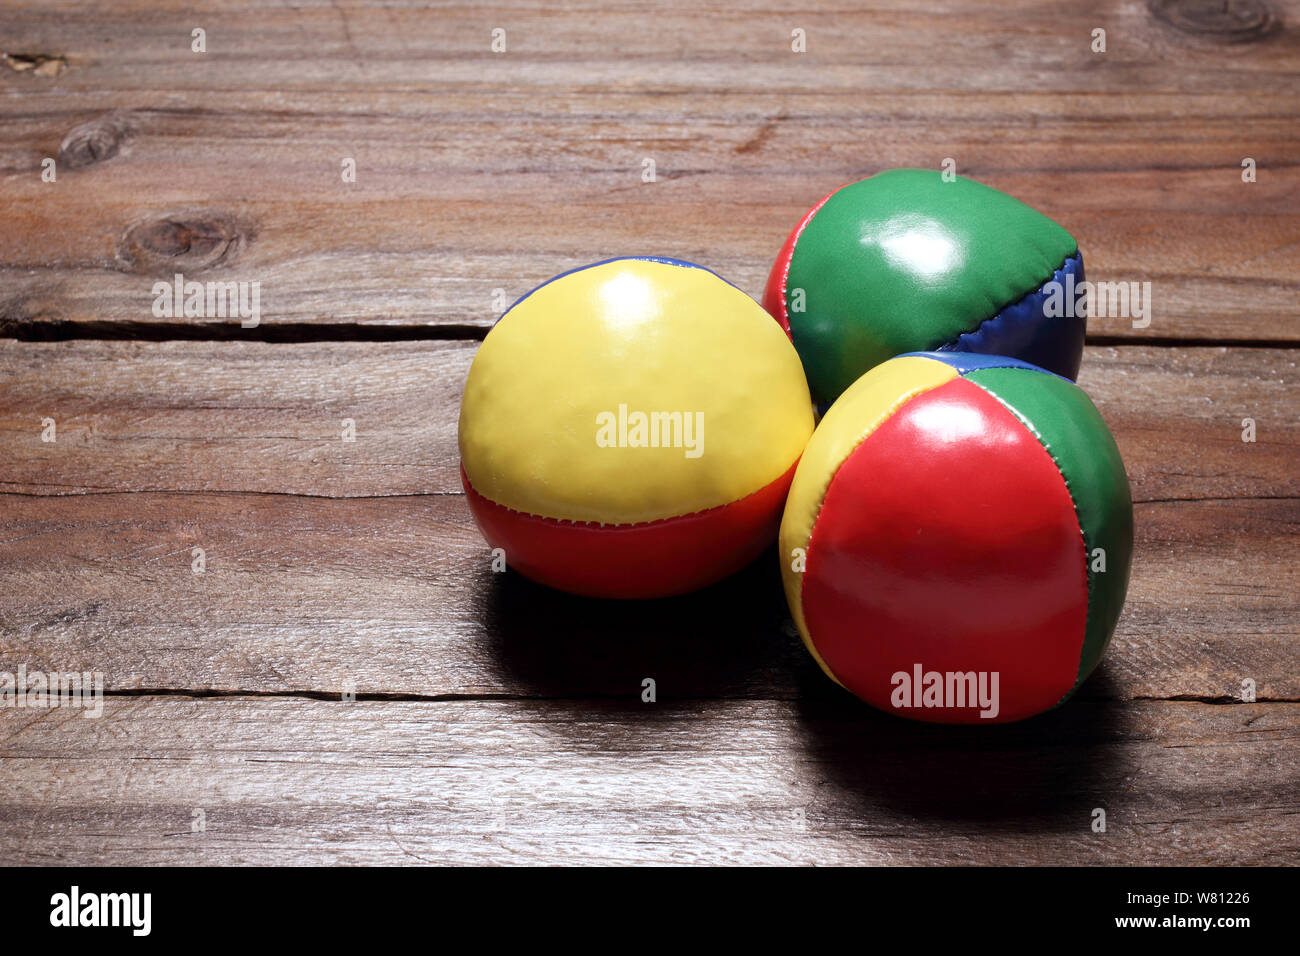 Juggling Balls on Wooden Background Stock Photo